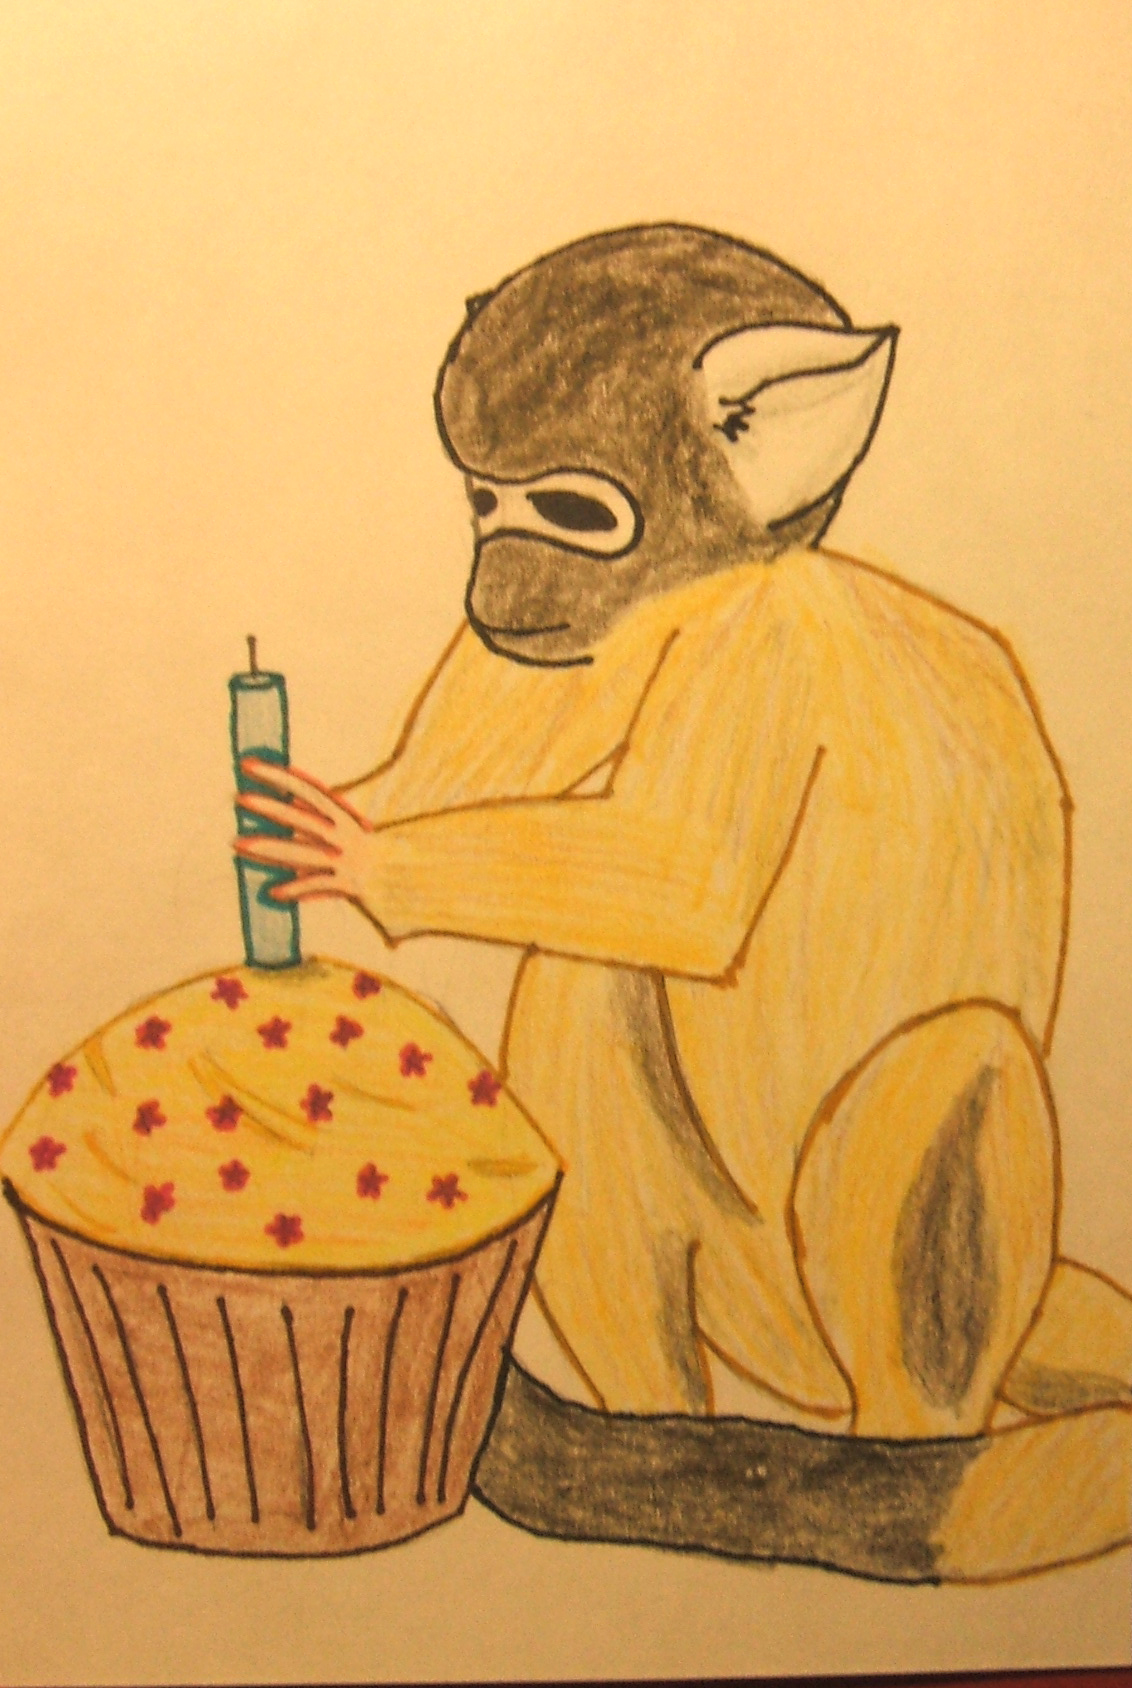 Monkey with a Cupcake by blackdragon1991